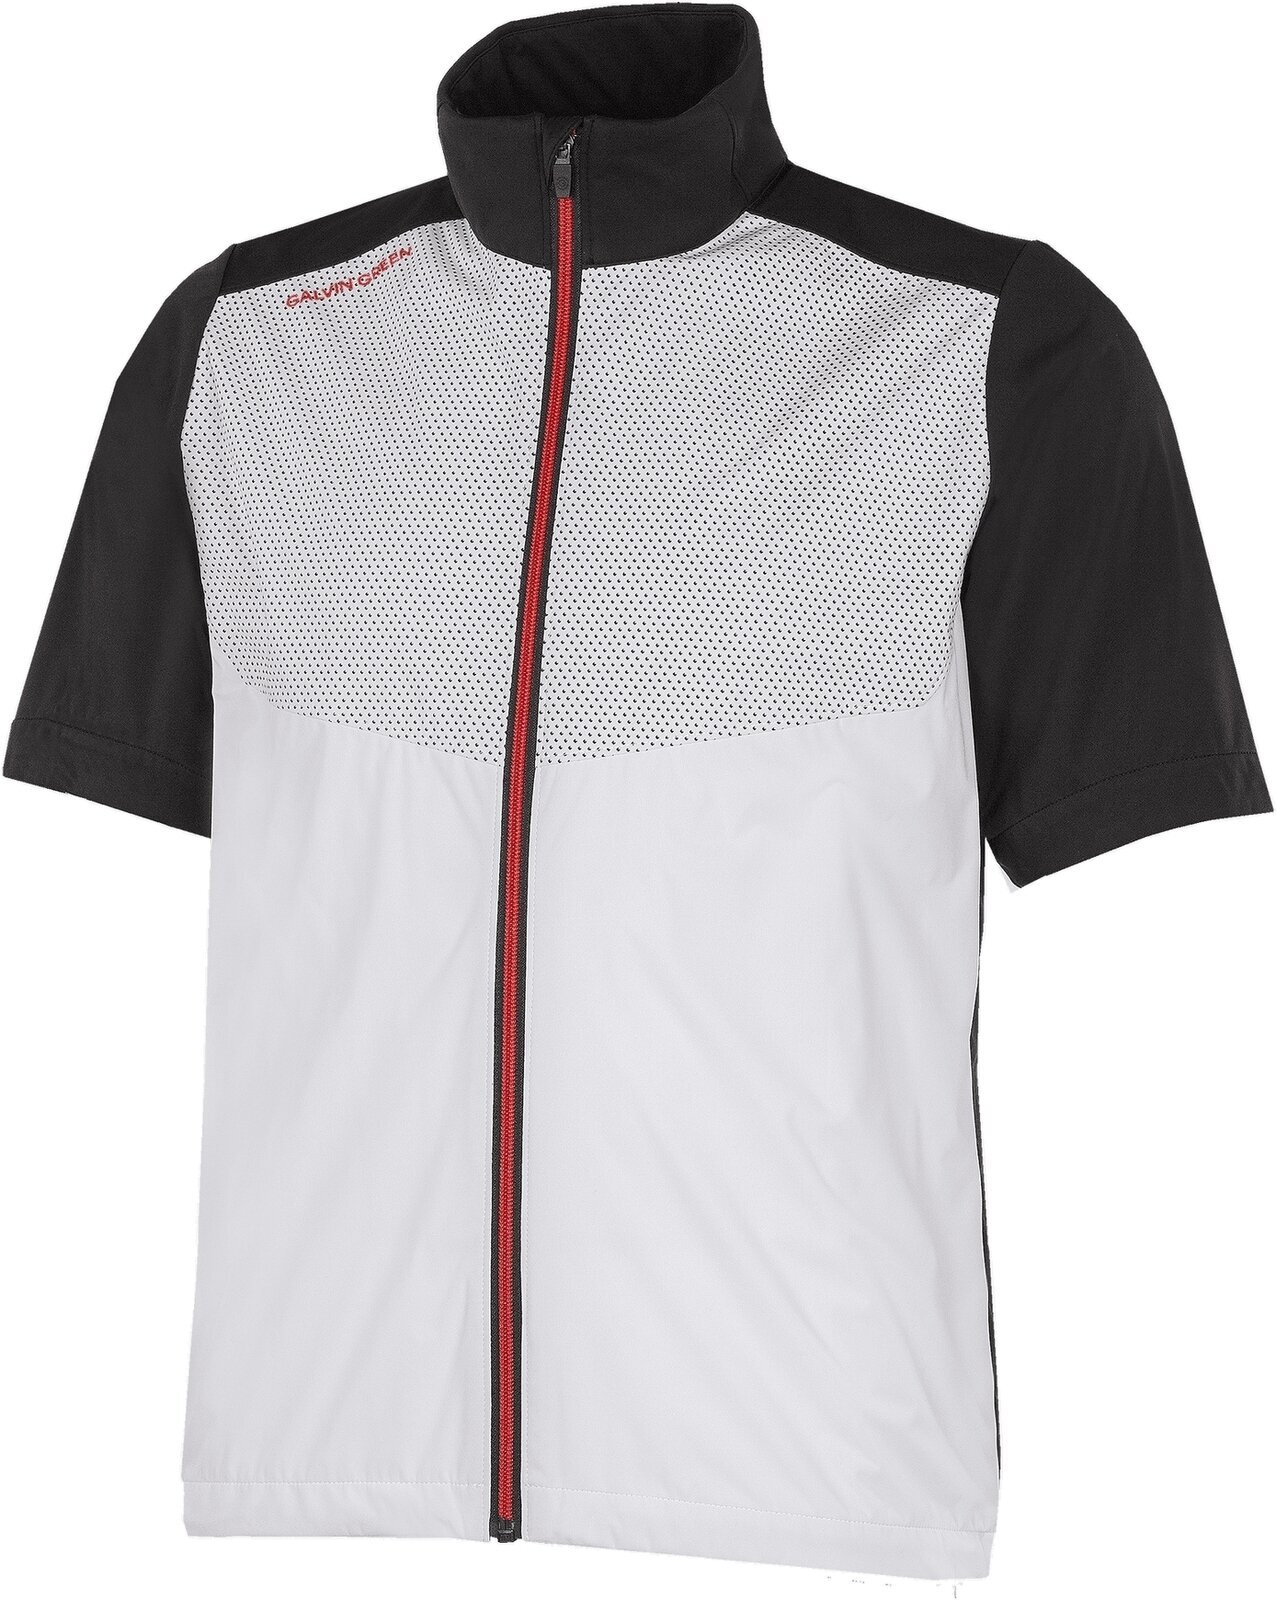 Jacket Galvin Green Livingston Mens Windproof And Water Repellent Short Sleeve Jacket White/Black/Red M